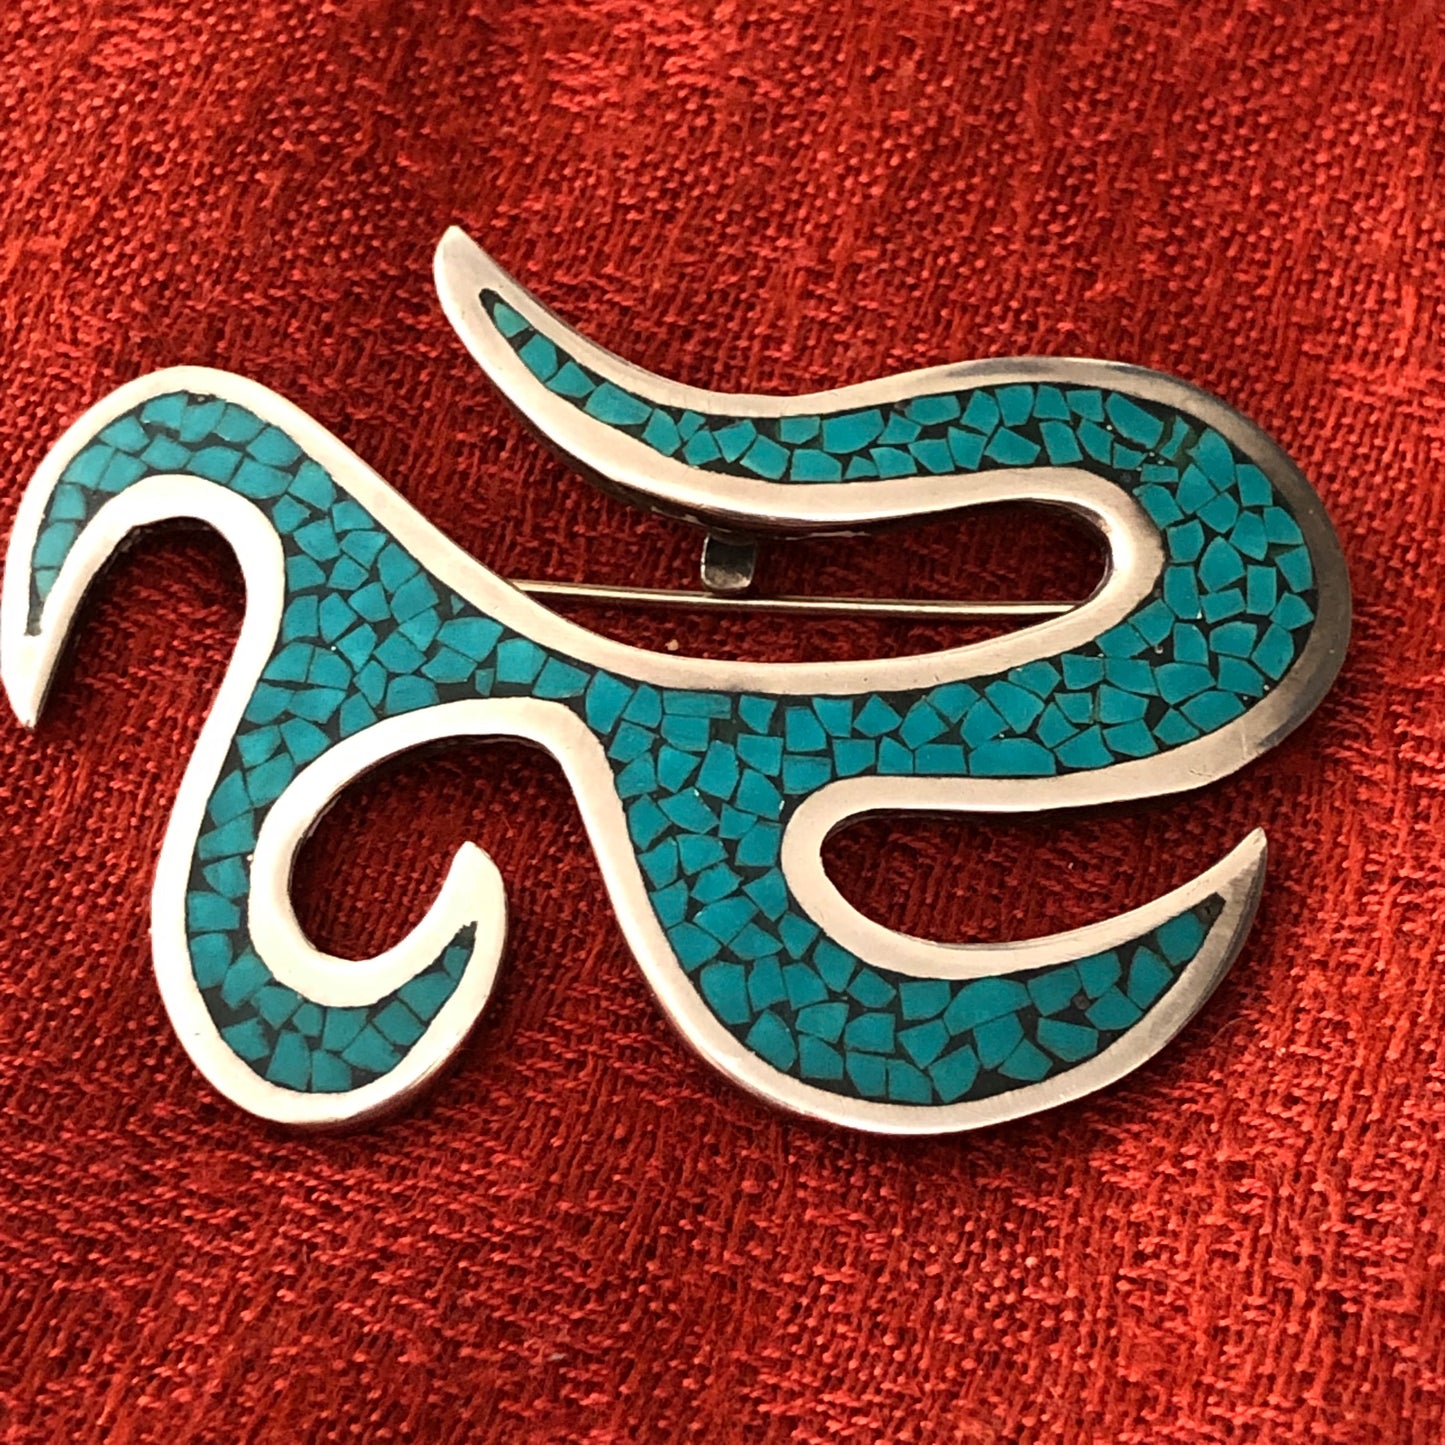 Arte en Plata Sterling Silver and Turquoise Brooch/Pendant